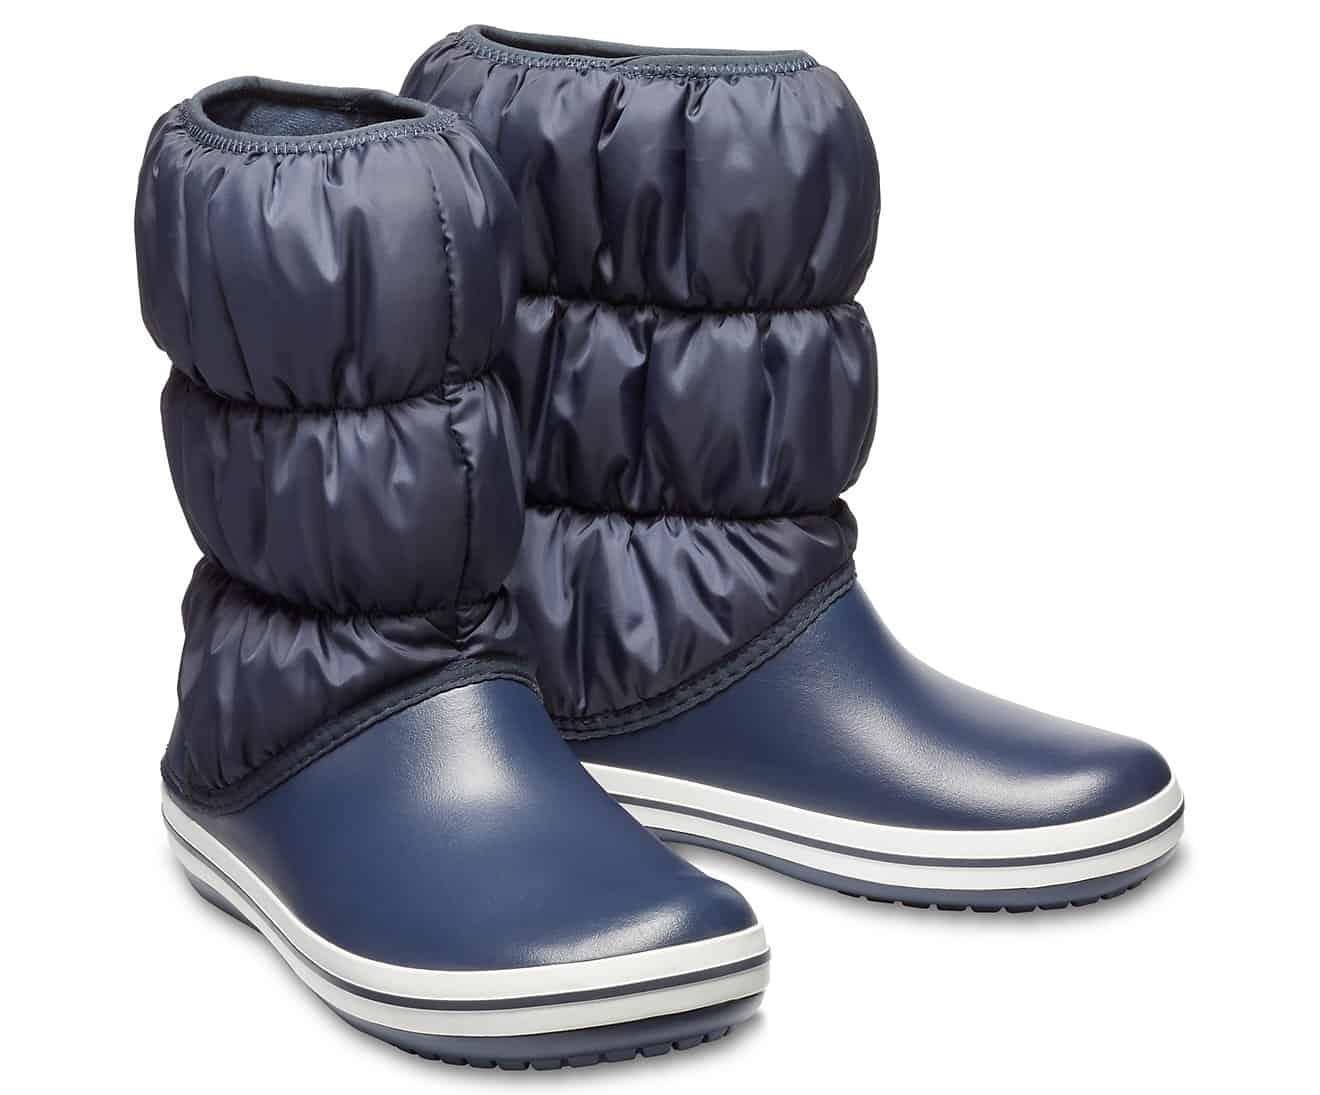 Crocs Womens Winter Puff Boot Puffer Shoes - Navy/White - US W6